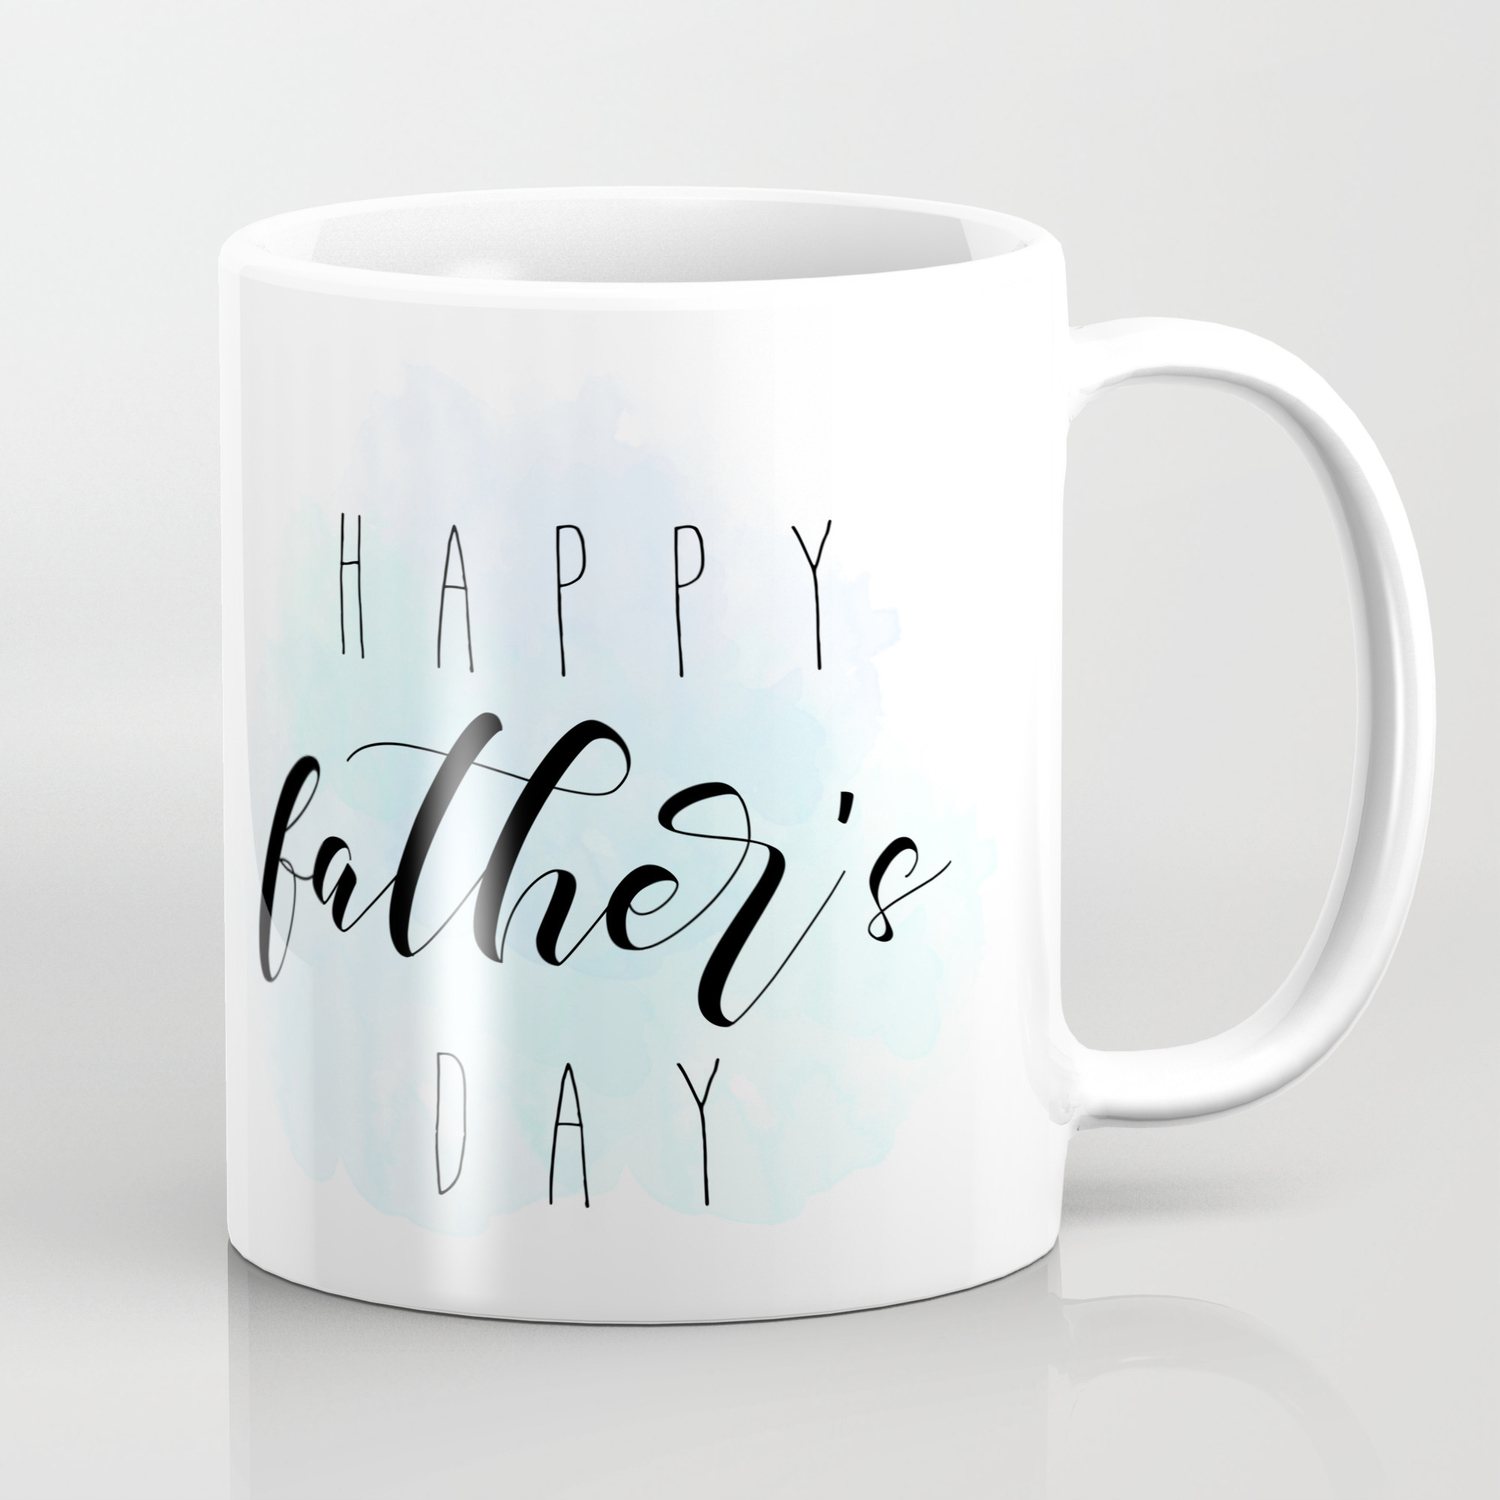 MAUAG Funny Christmas Gifts Coffee Mug Have a Great Day Cute Cool Ceramic Cup White 13 Oz Best Fathers Day and Mothers Day Gag Gifts